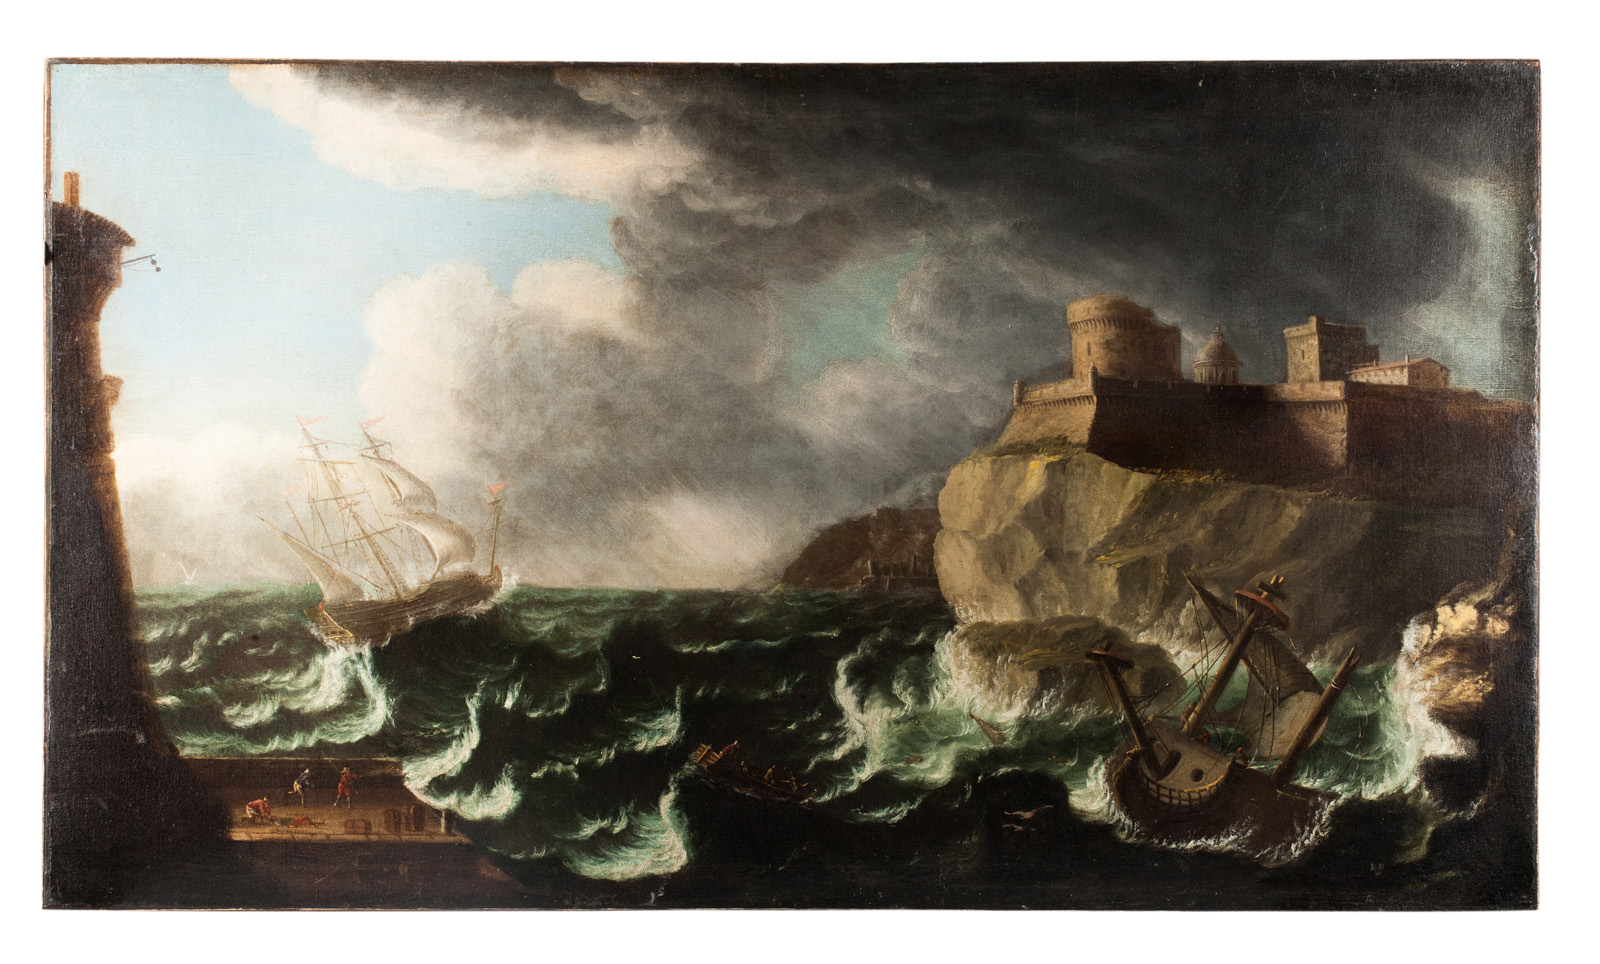 Shipwreck. Painting by unknown artist. Western Europe, possibly Flanders, early XVIII century. - landofmagazines.com